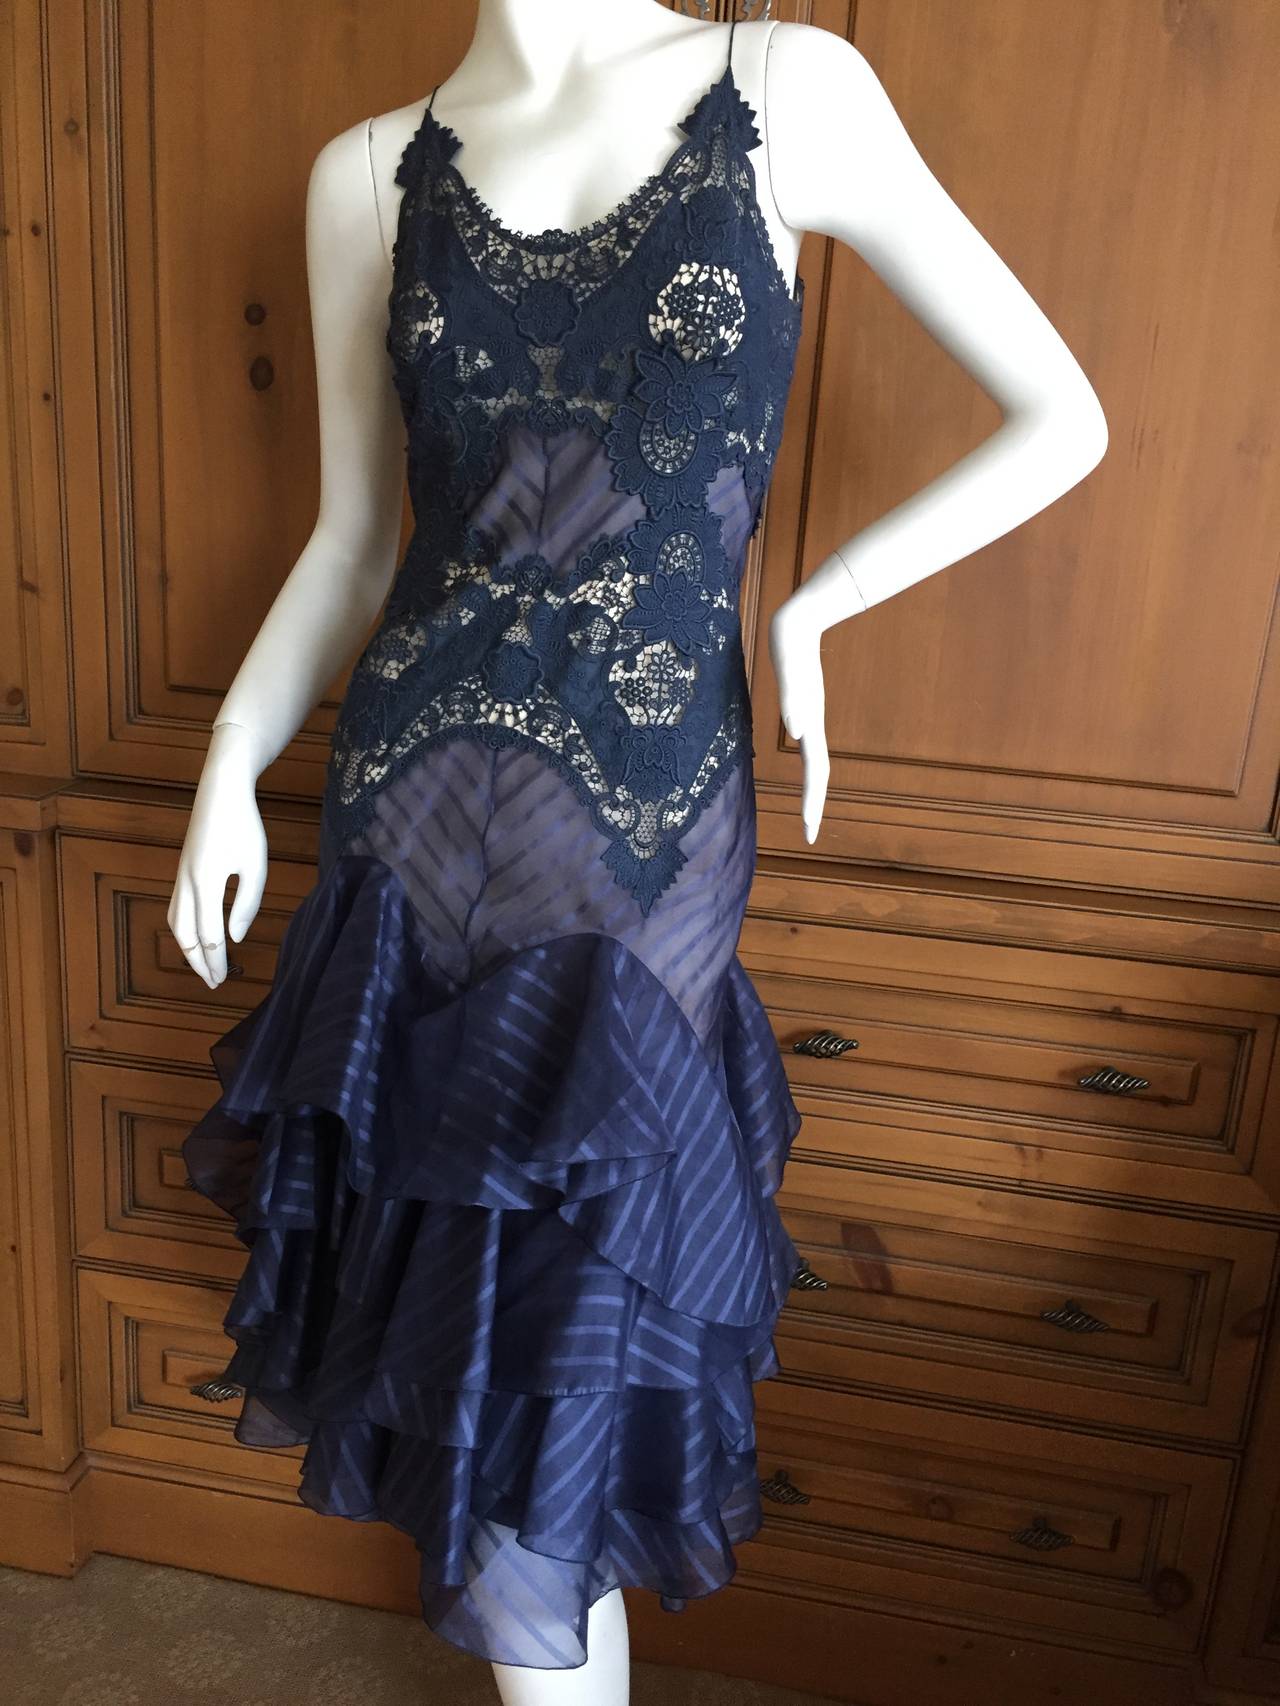 Alexander McQueen Sheer Navy Lace Dress 2004 .
Size 40
Exquisite Guipure Lace dress with ruffle flounces along the skirt.
It is lined with nude lining, so very pretty.
Bust 38